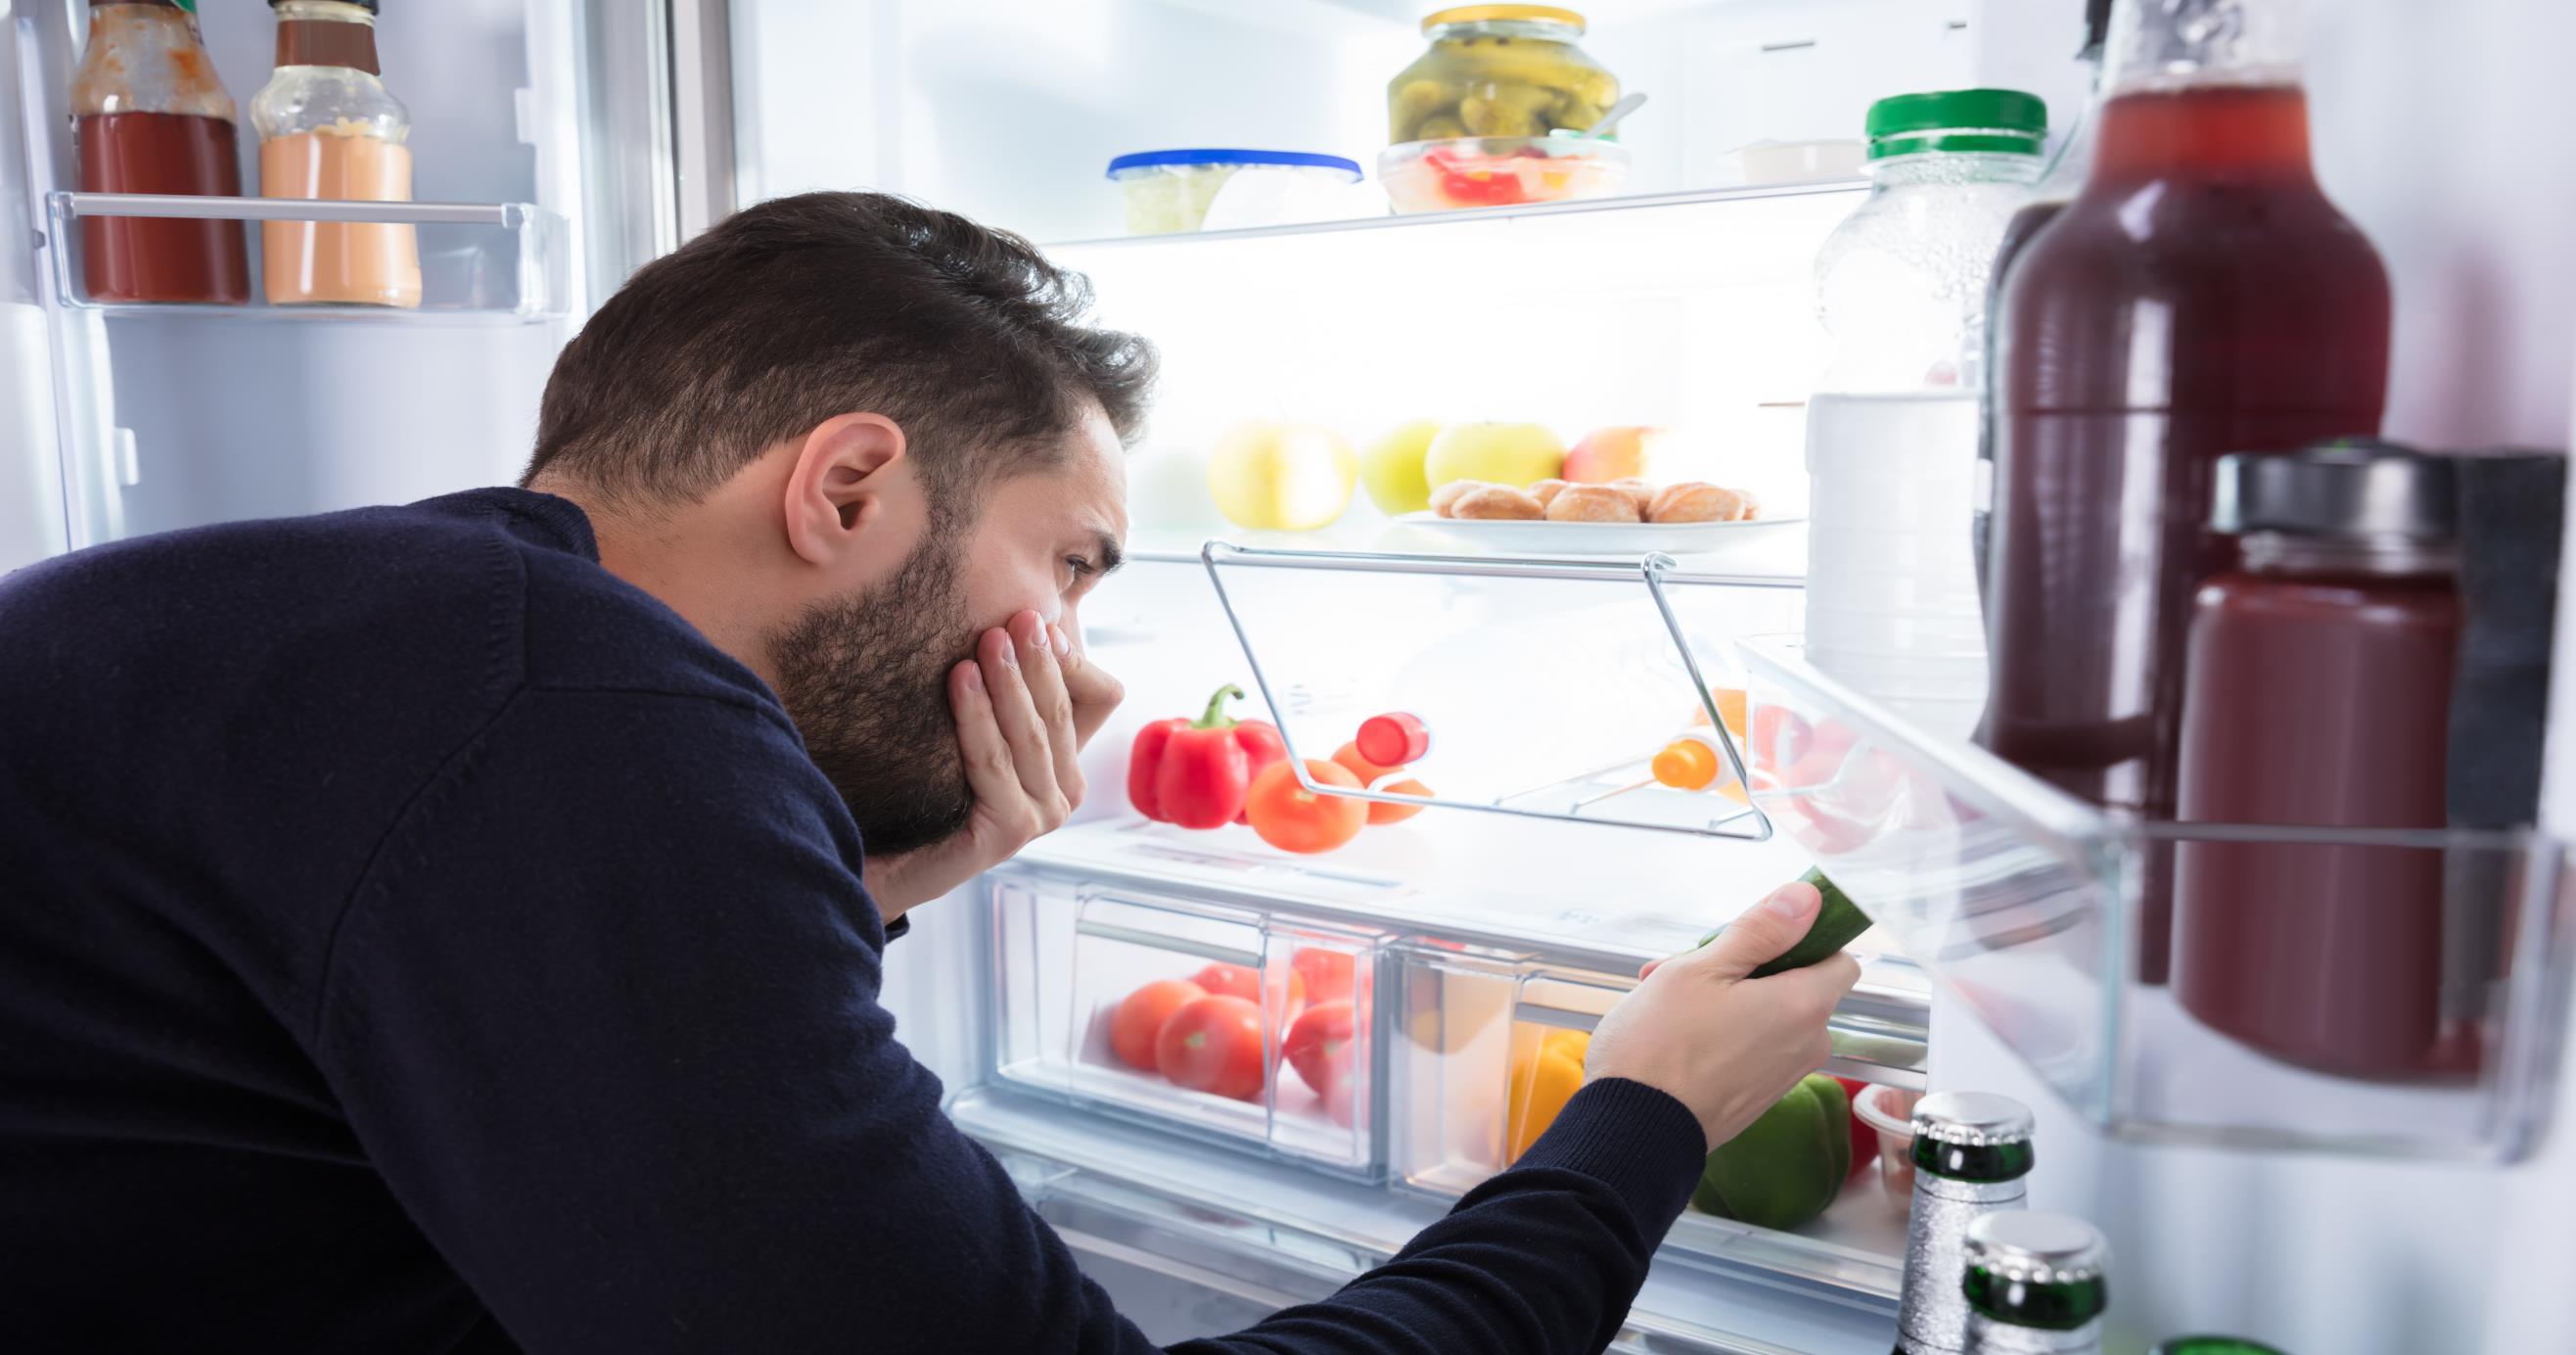 common-refrigerator-problems-and-how-to-fix-them-homeserve